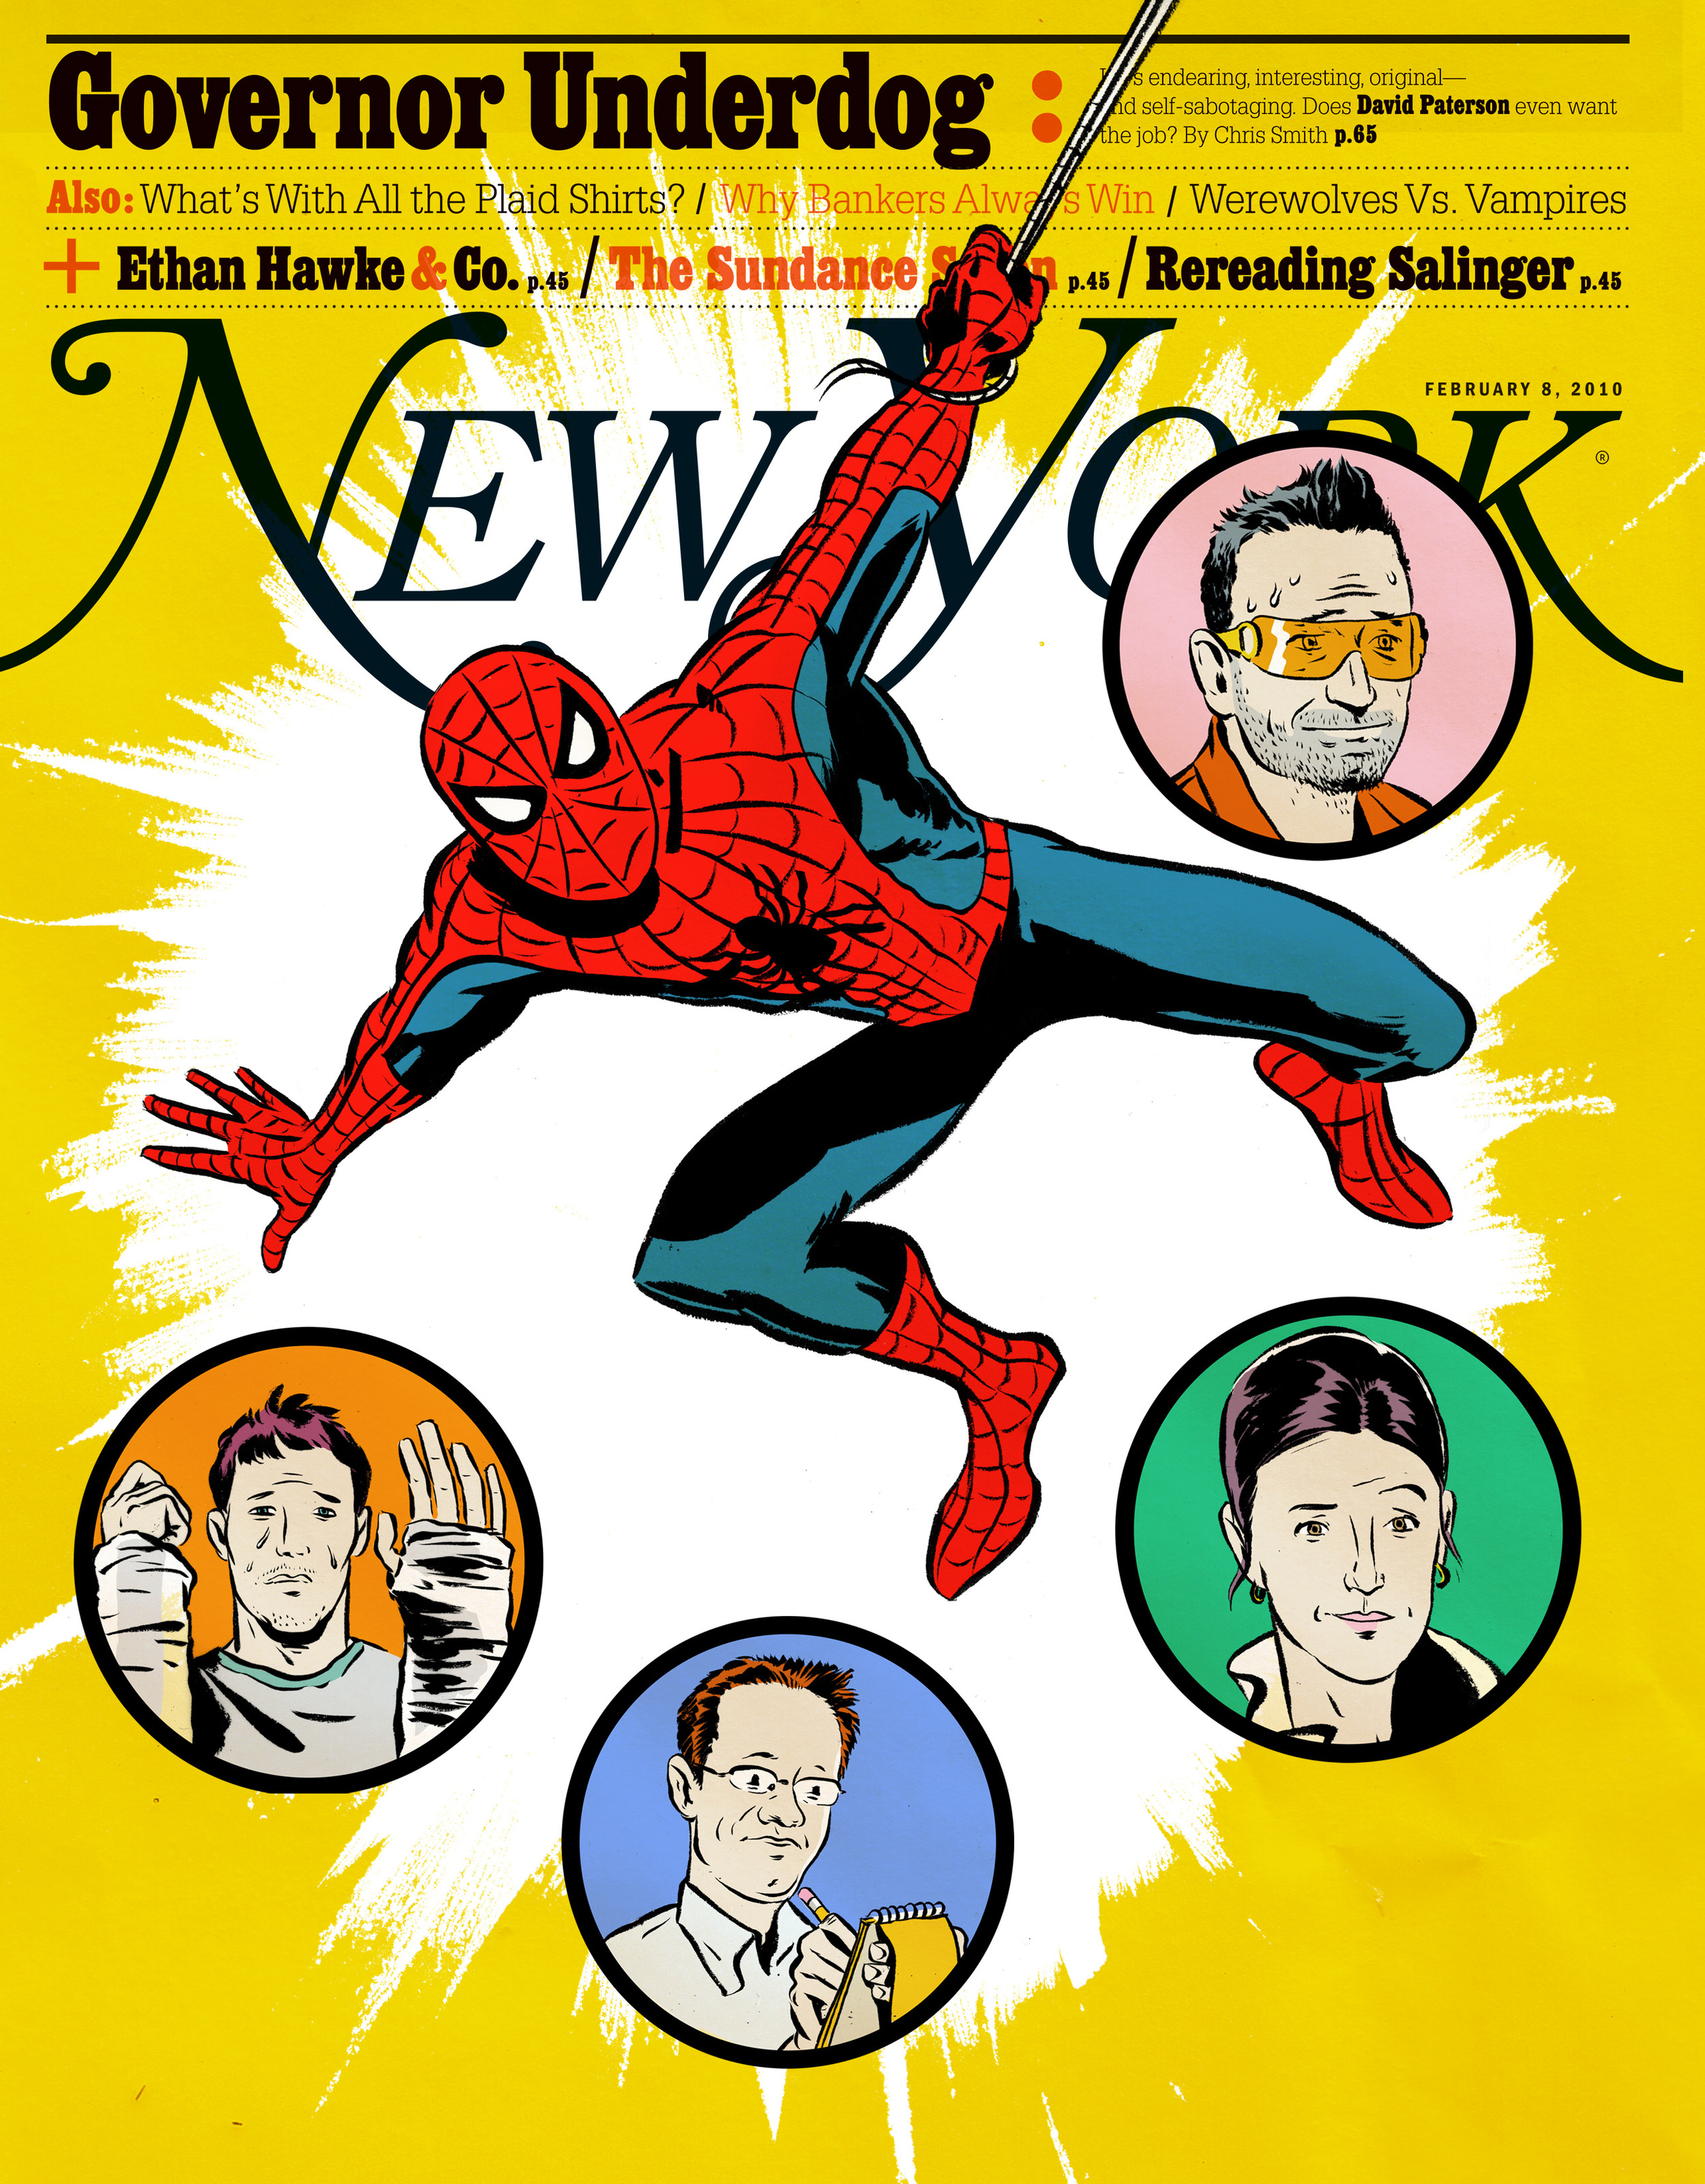   New York Magazine : Cover illustration for feature about the troubles plaguing&nbsp; the Spider Man on Broadway. (Sadly, it did not run)&nbsp; 